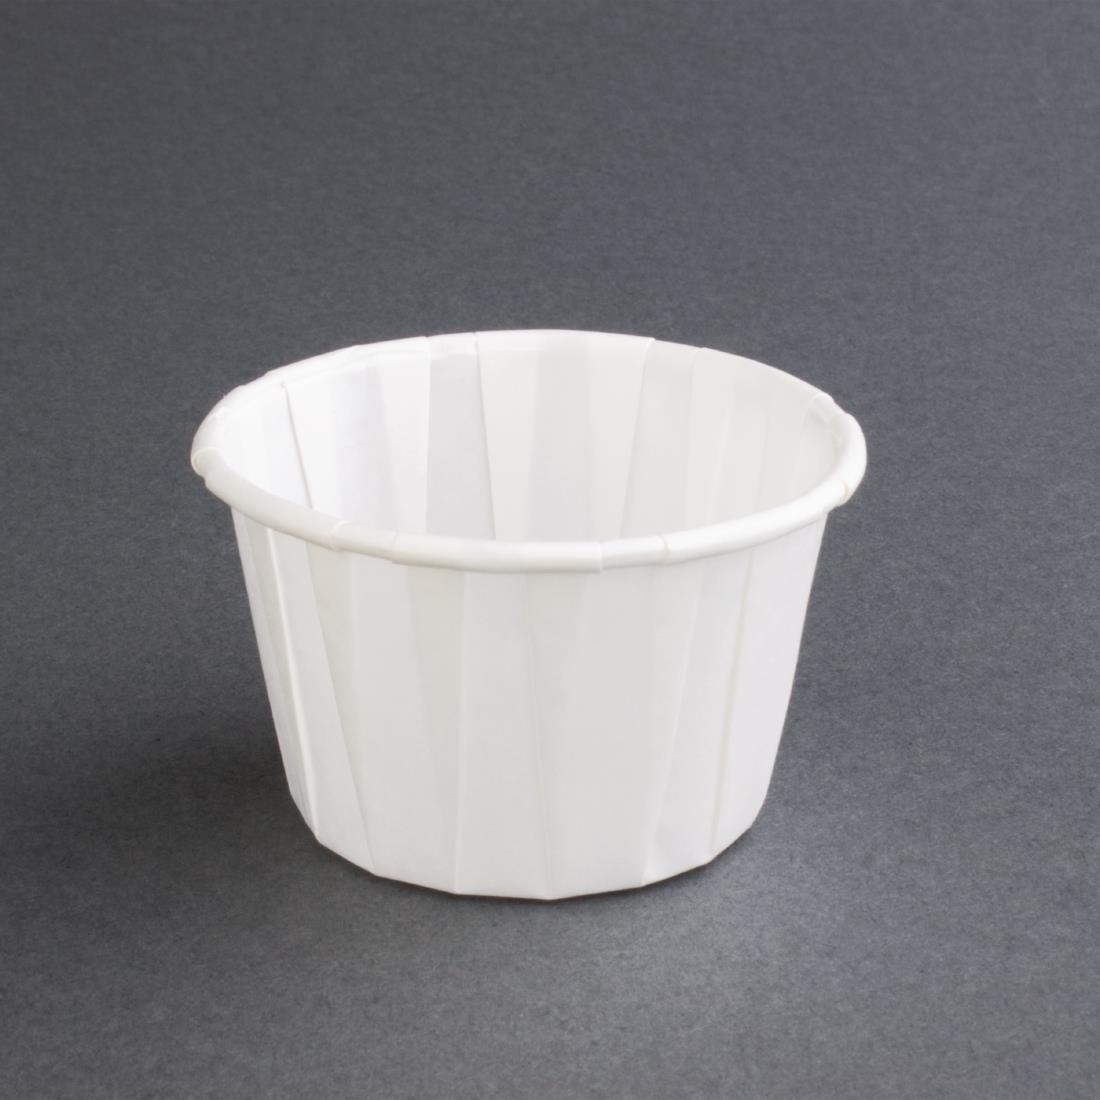 Recyclable Paper Sauce Pots Medium 2oz Pack of 250 (CX081)